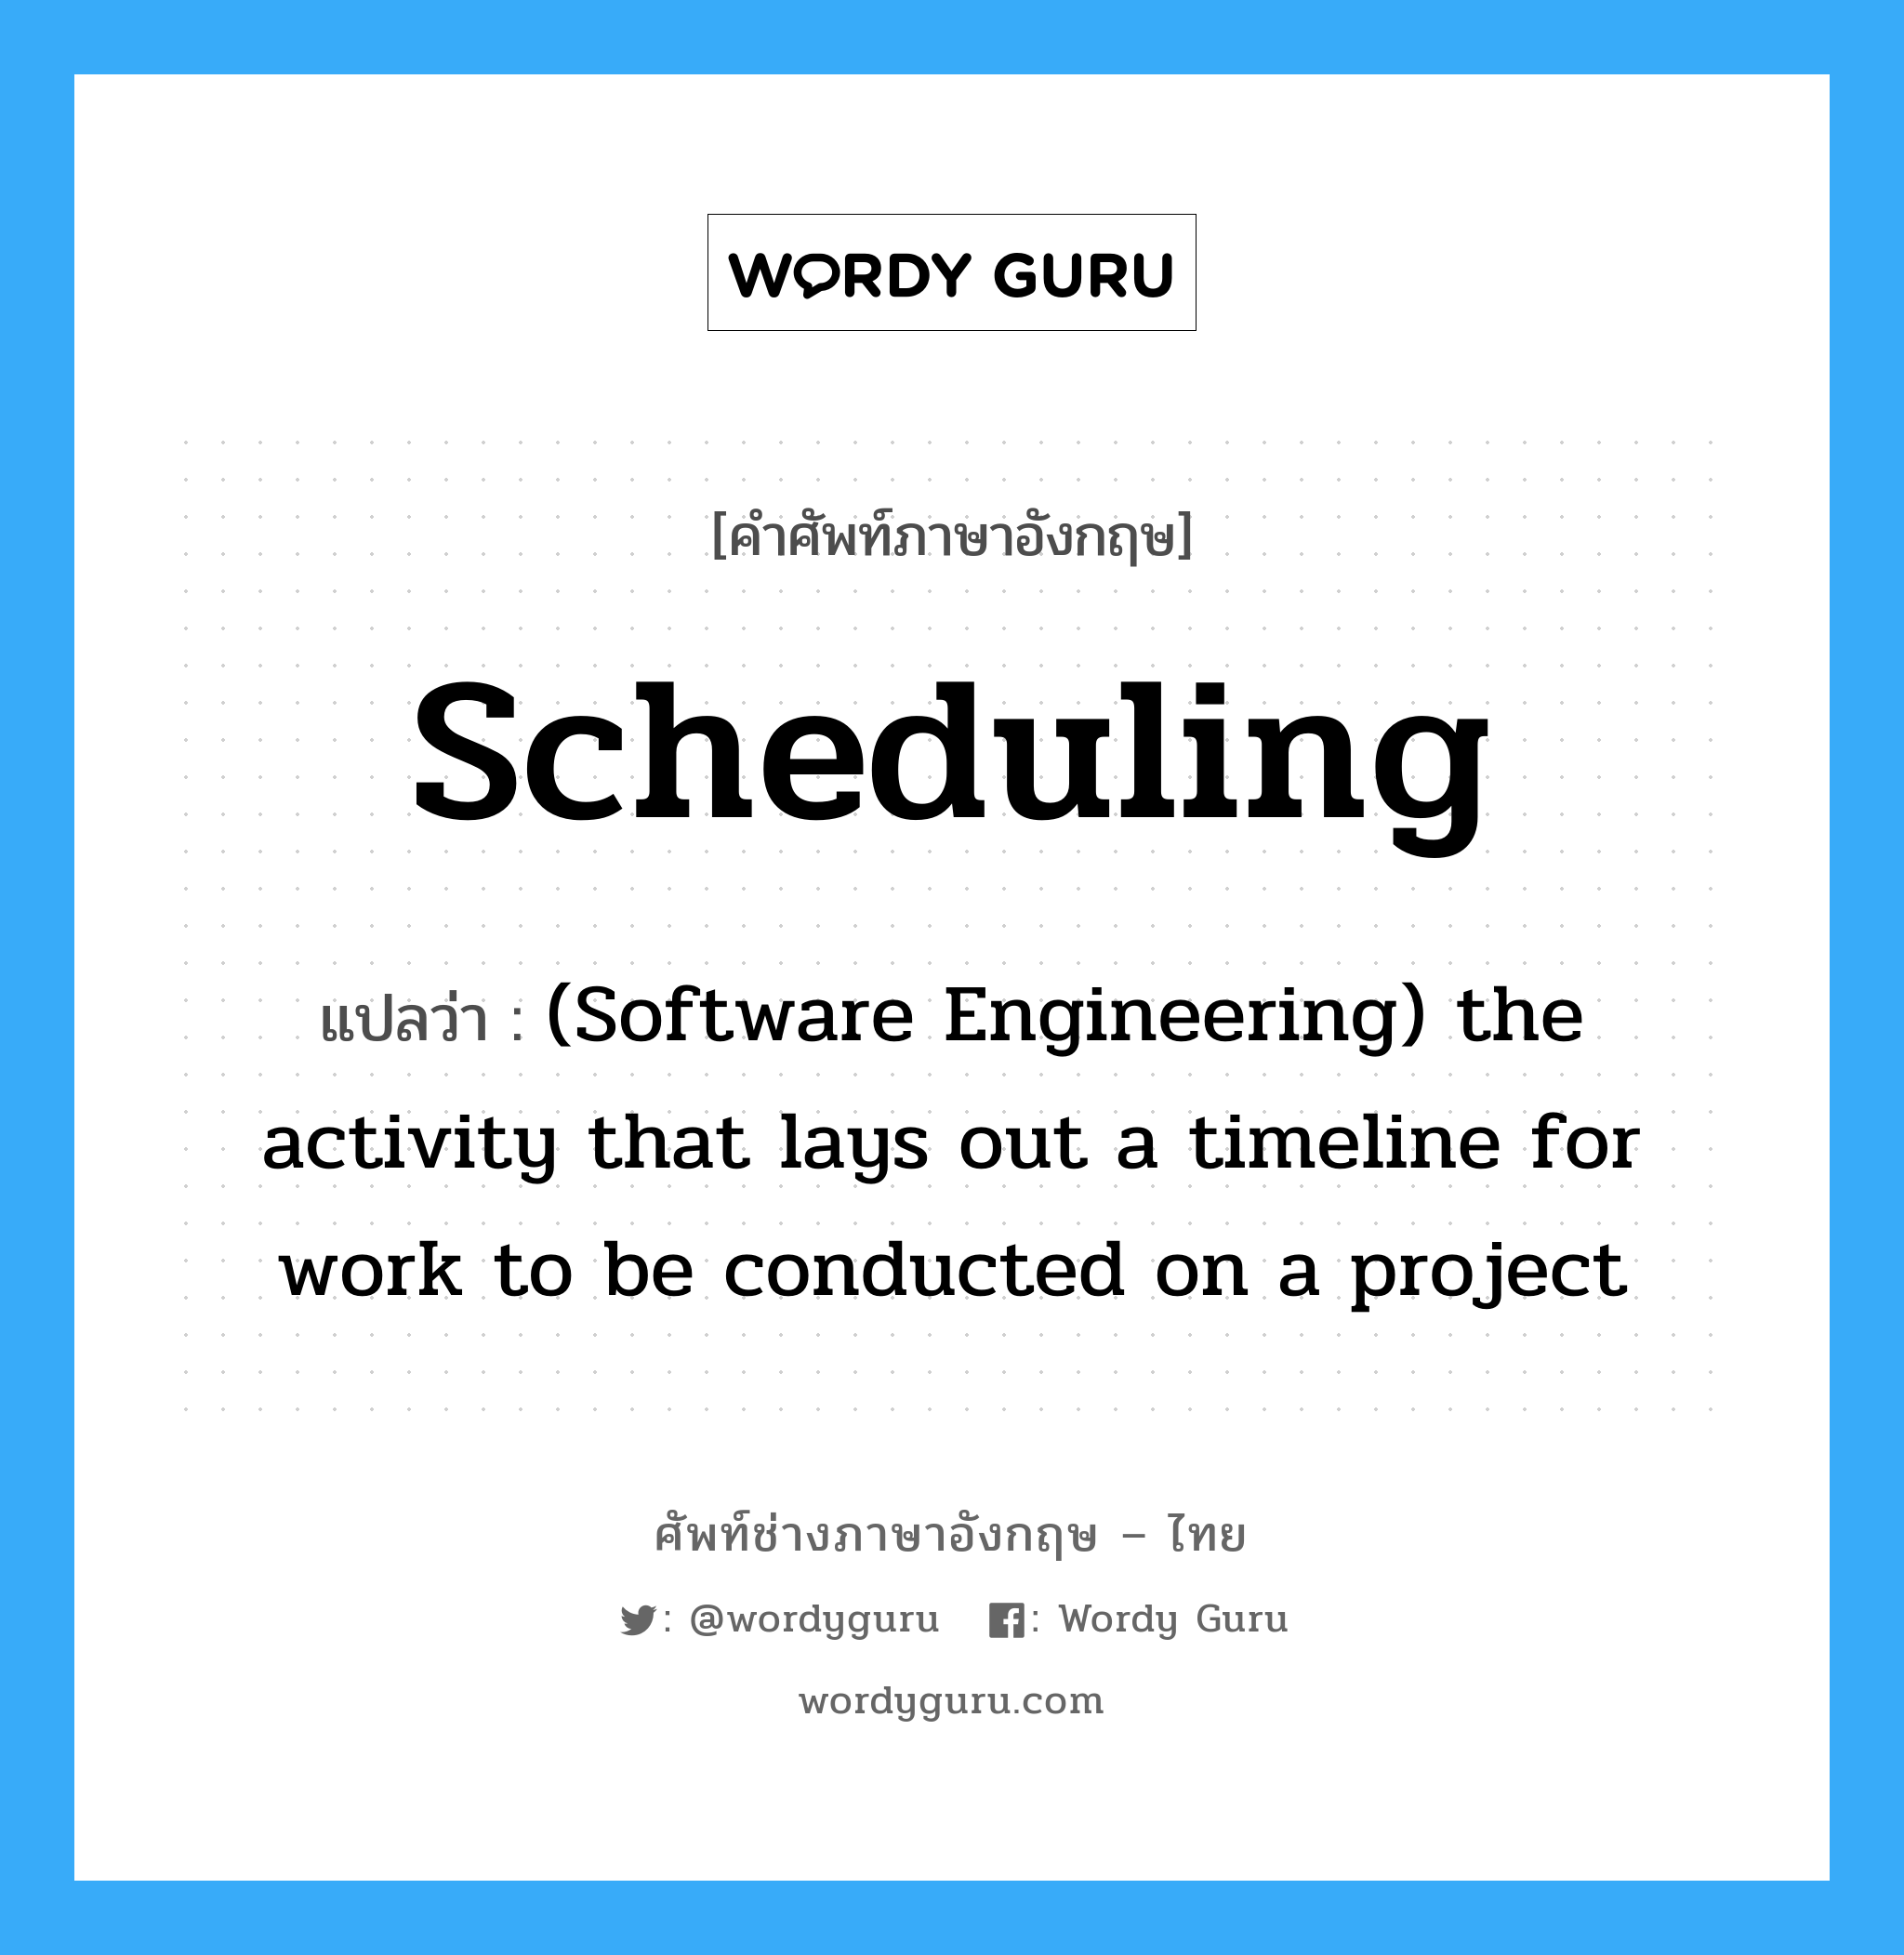 Scheduling แปลว่า?, คำศัพท์ช่างภาษาอังกฤษ - ไทย Scheduling คำศัพท์ภาษาอังกฤษ Scheduling แปลว่า (Software Engineering) the activity that lays out a timeline for work to be conducted on a project